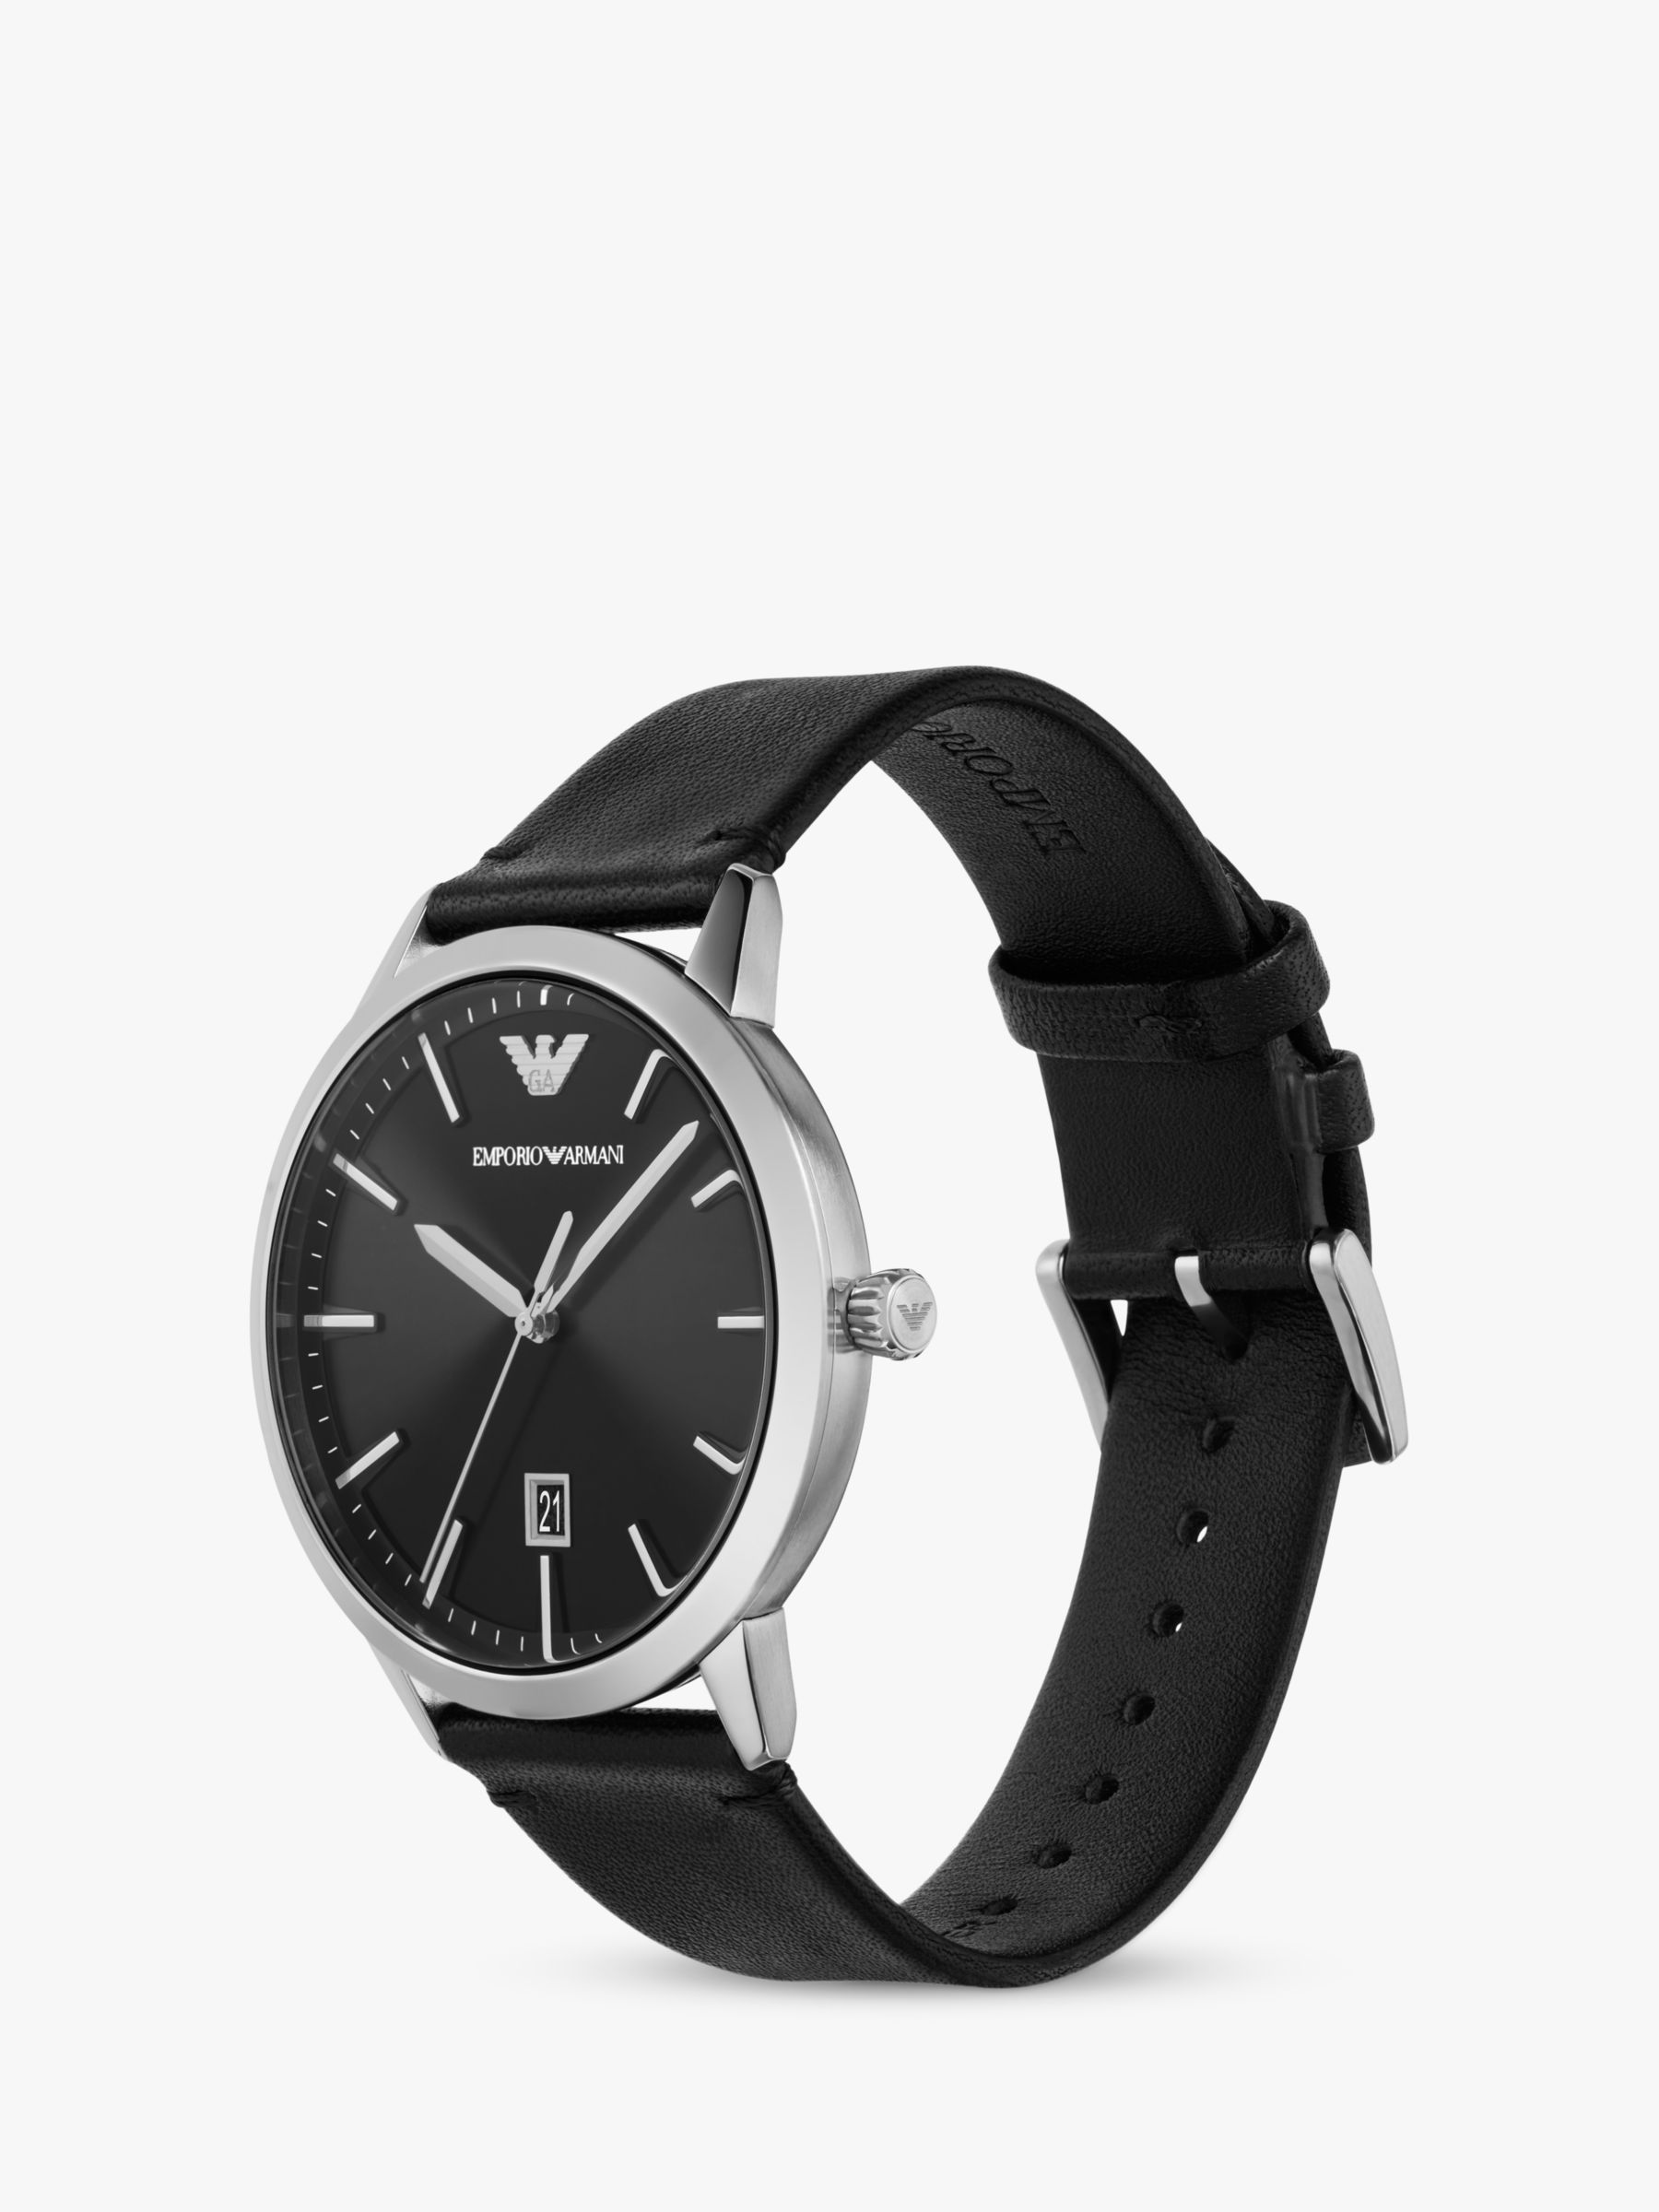 Buy Emporio Armani AR11193 Men's Date Leather Strap Watch, Silver/Black Online at johnlewis.com